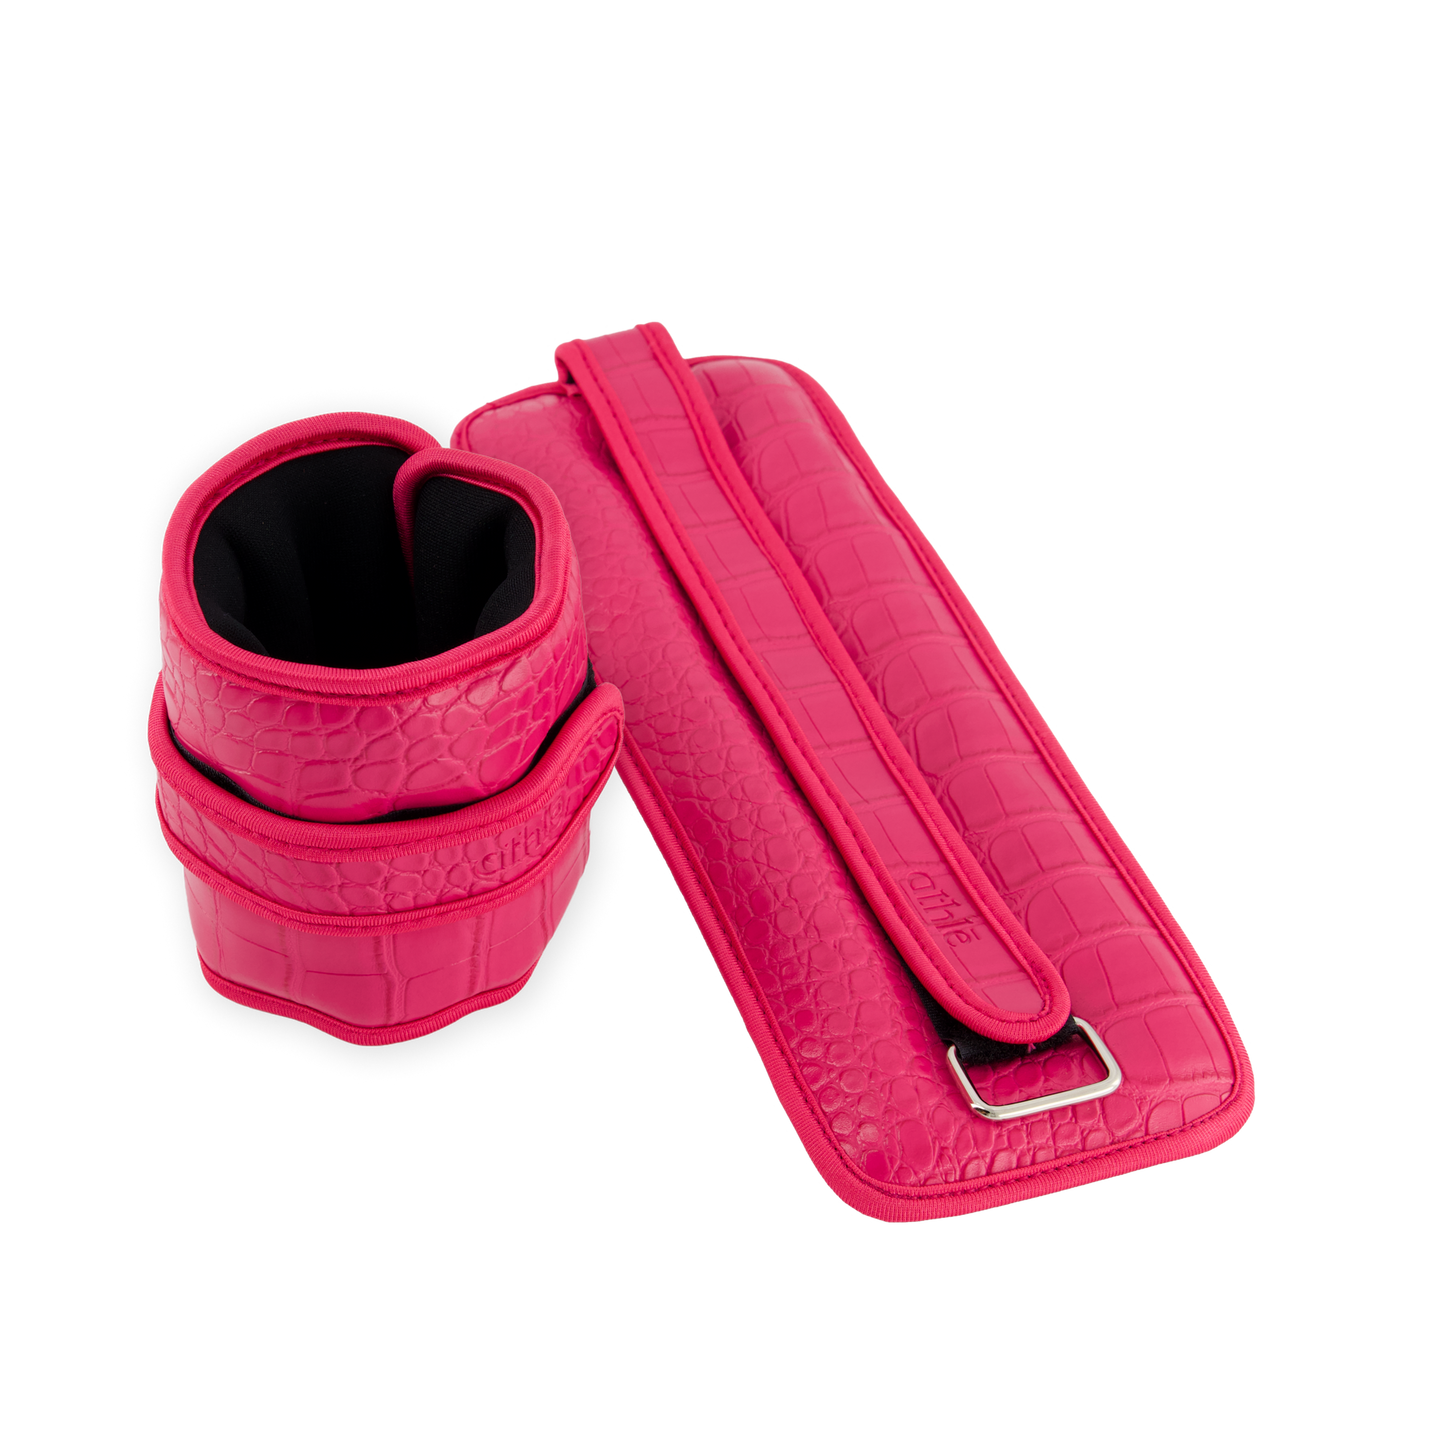 Croco Pink ankle and wrist weights